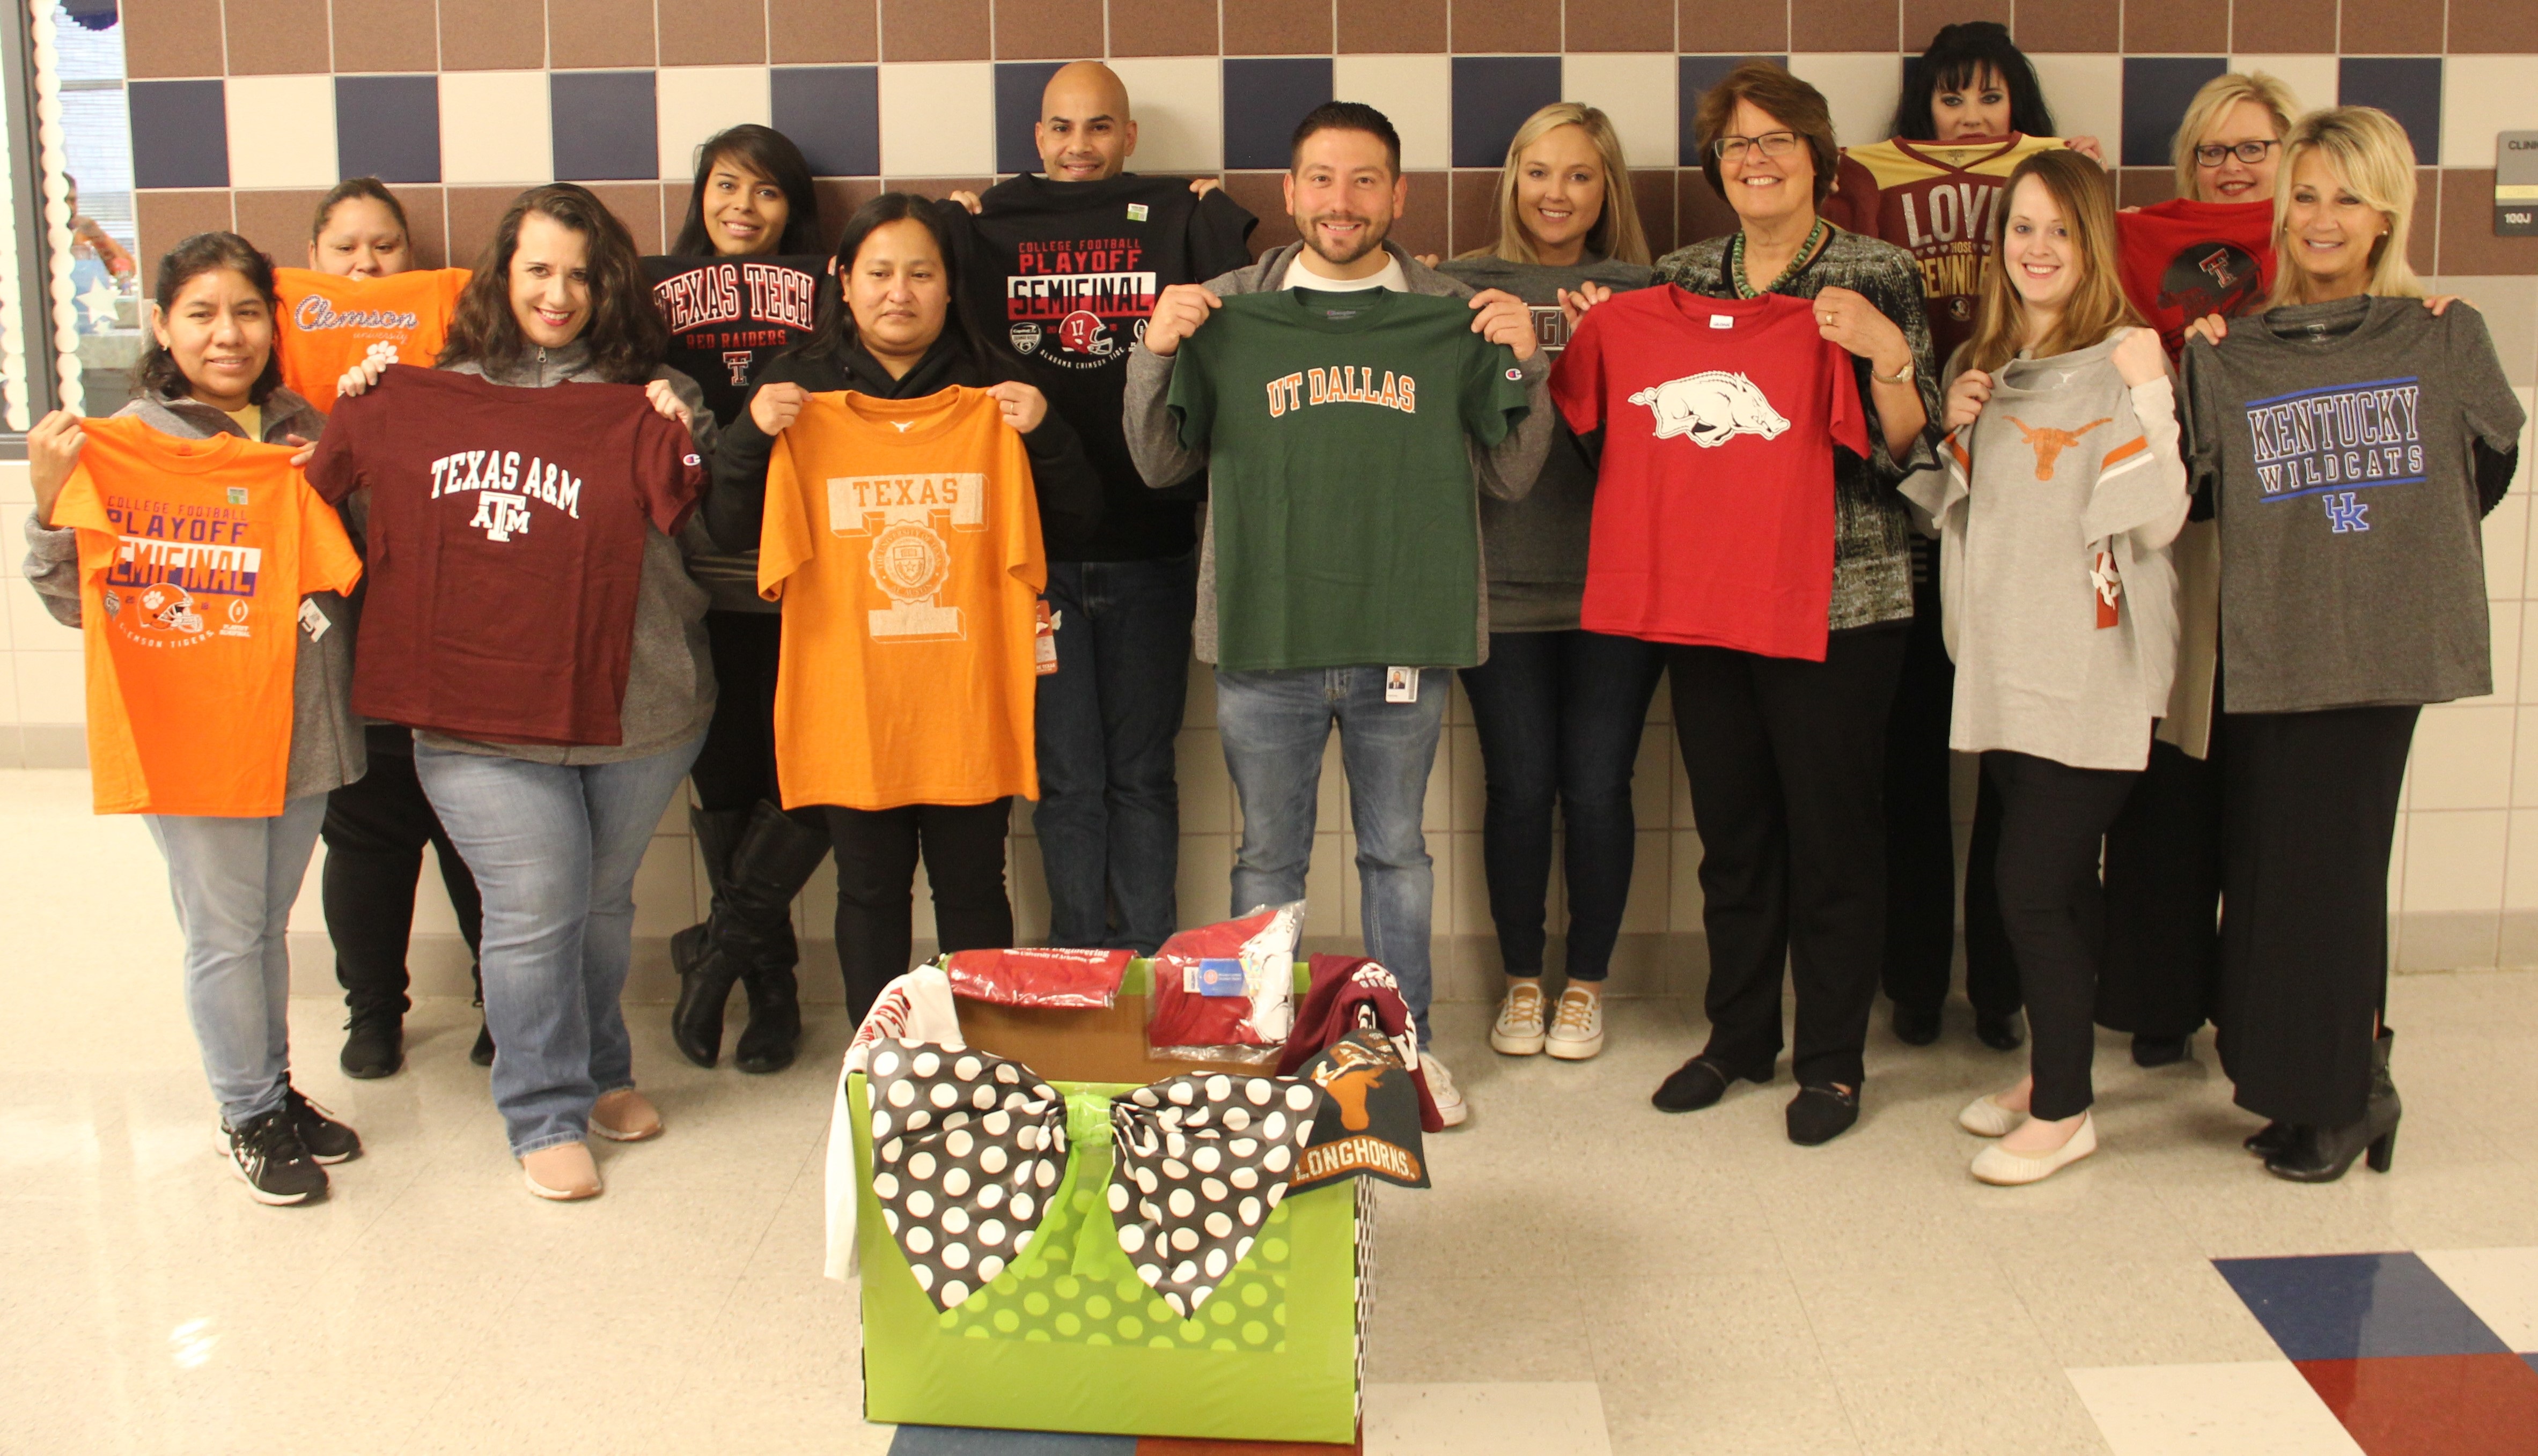 RISD staff with college tees